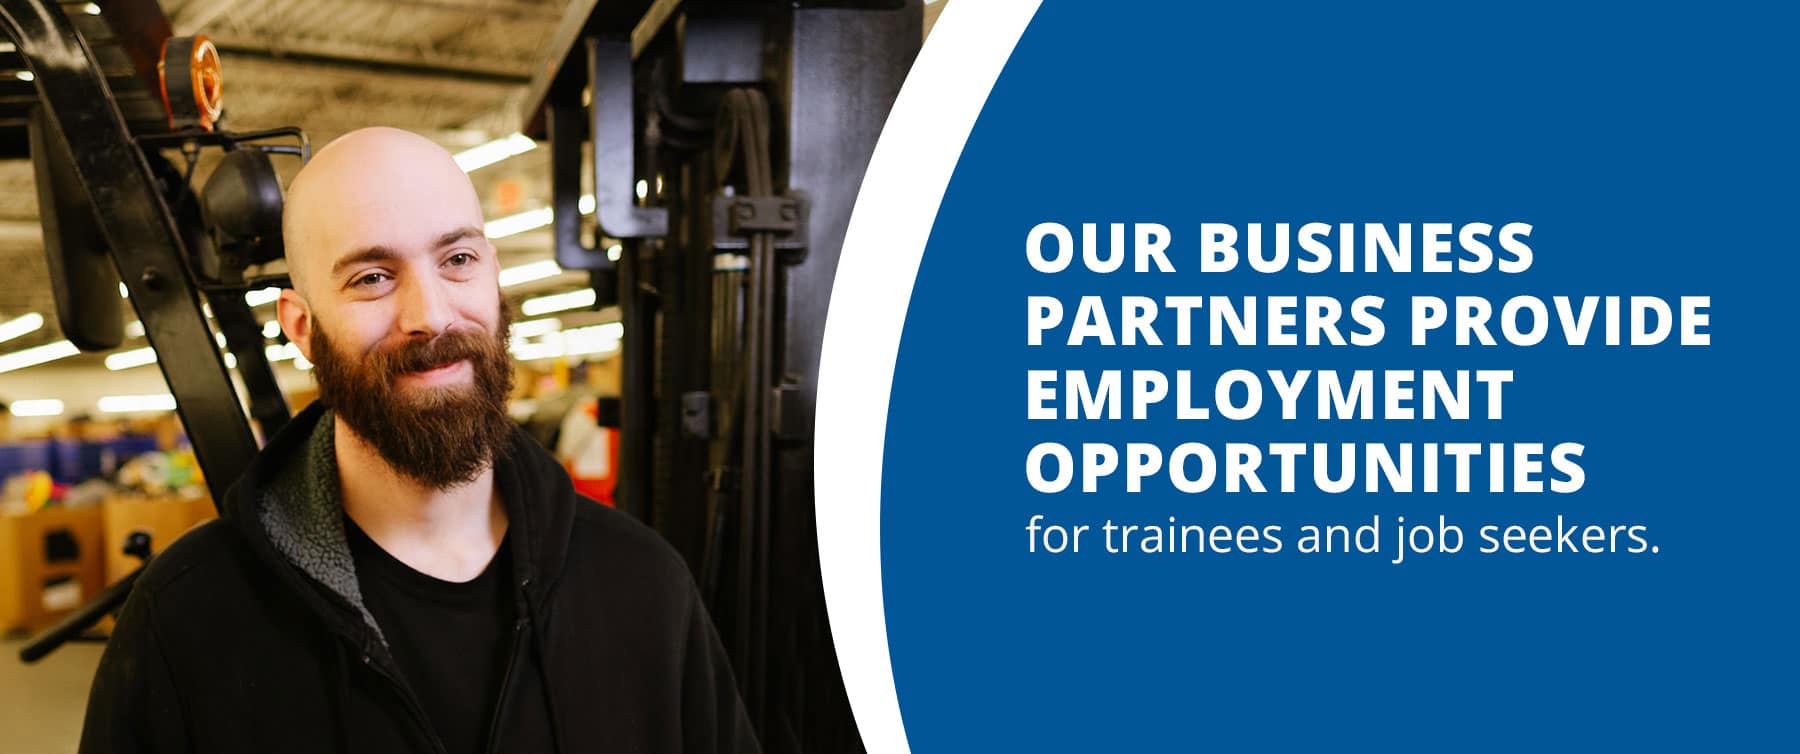 Our business partners provide employment opportunities for trainees and job seekers. 